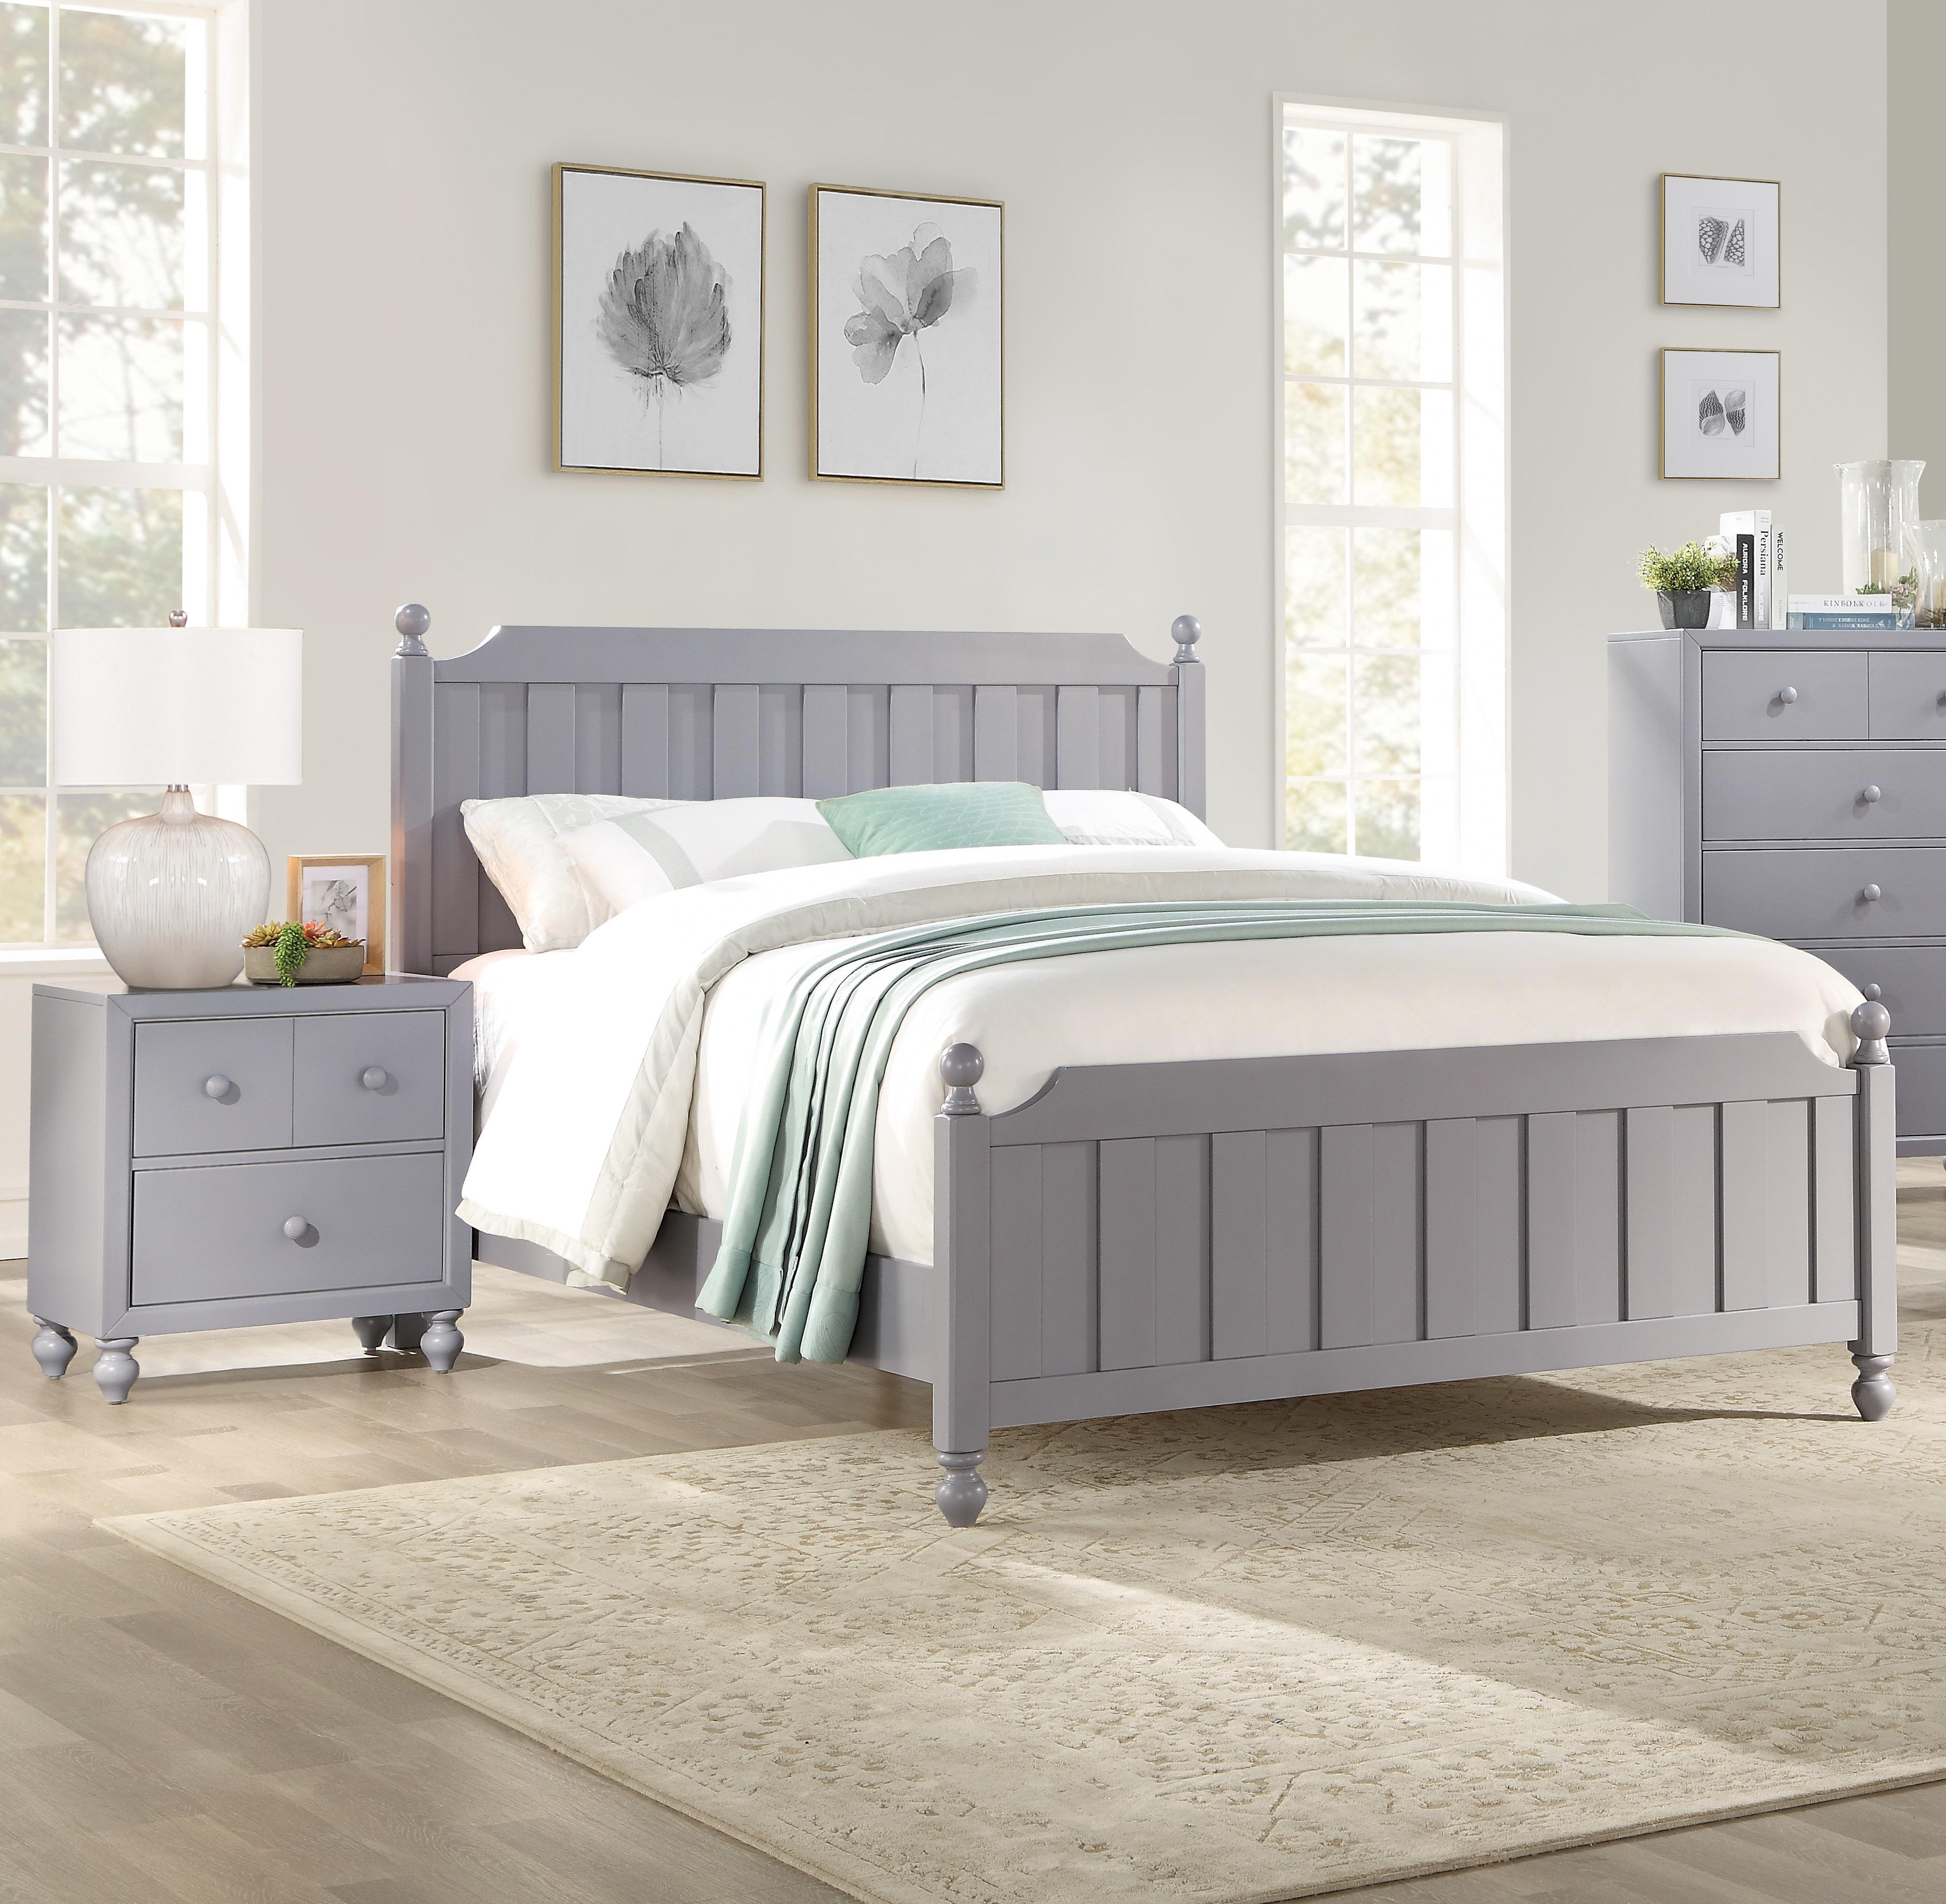 Modern Bedroom Set 1803GY-1-3PC Wellsummer 1803GY-1-3PC in Gray 